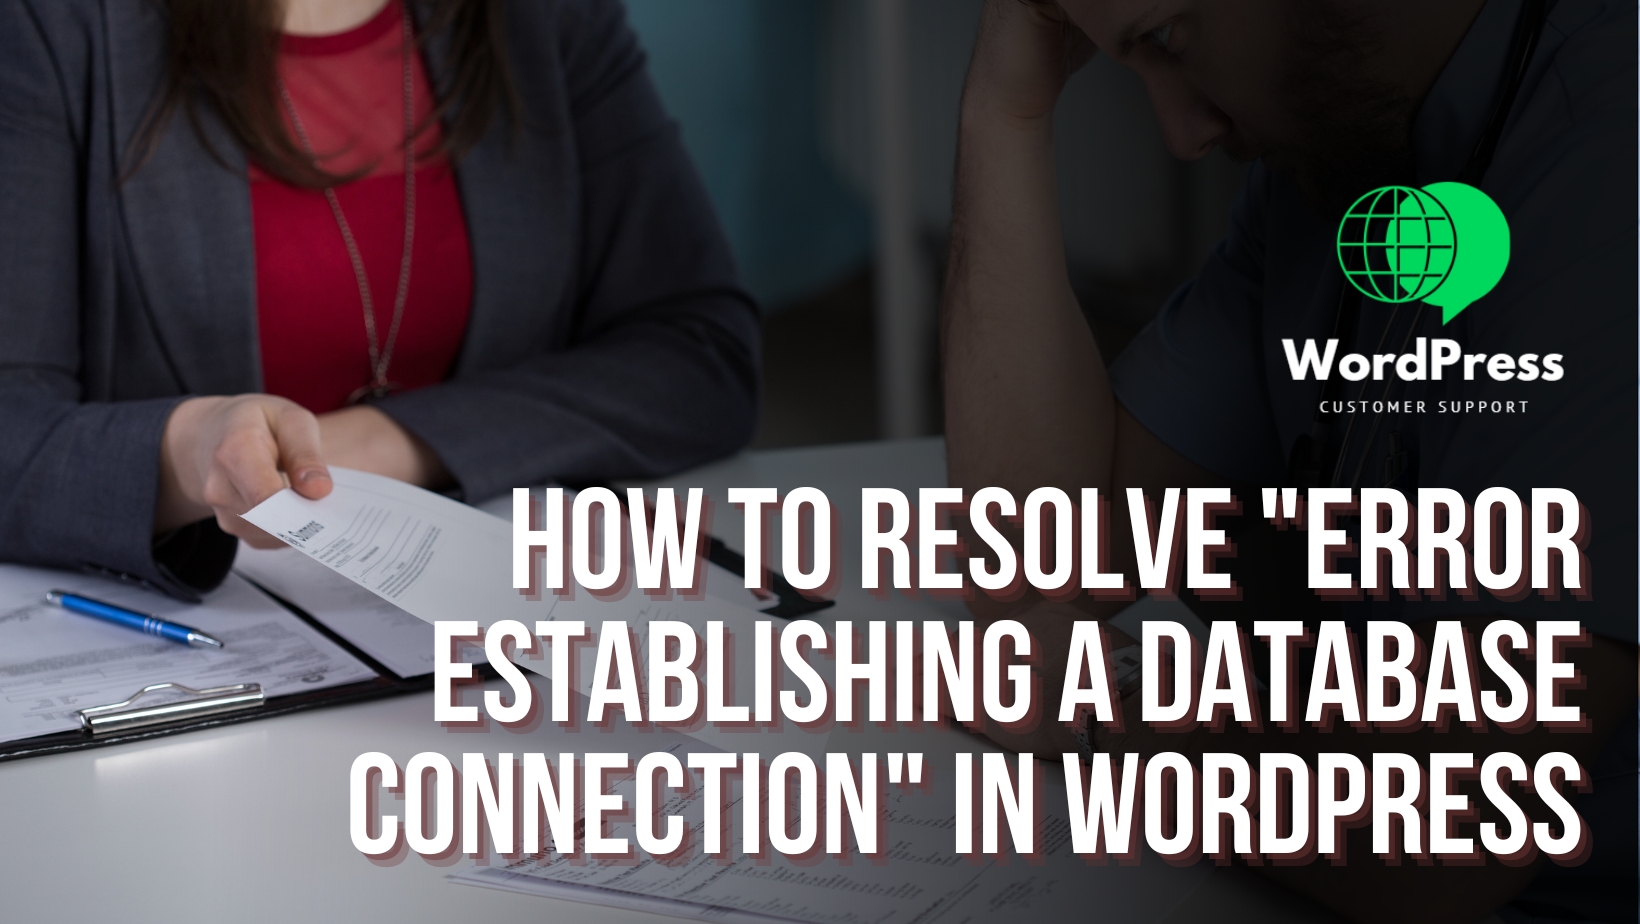 How to Resolve “Error Establishing a Database Connection” in WordPress